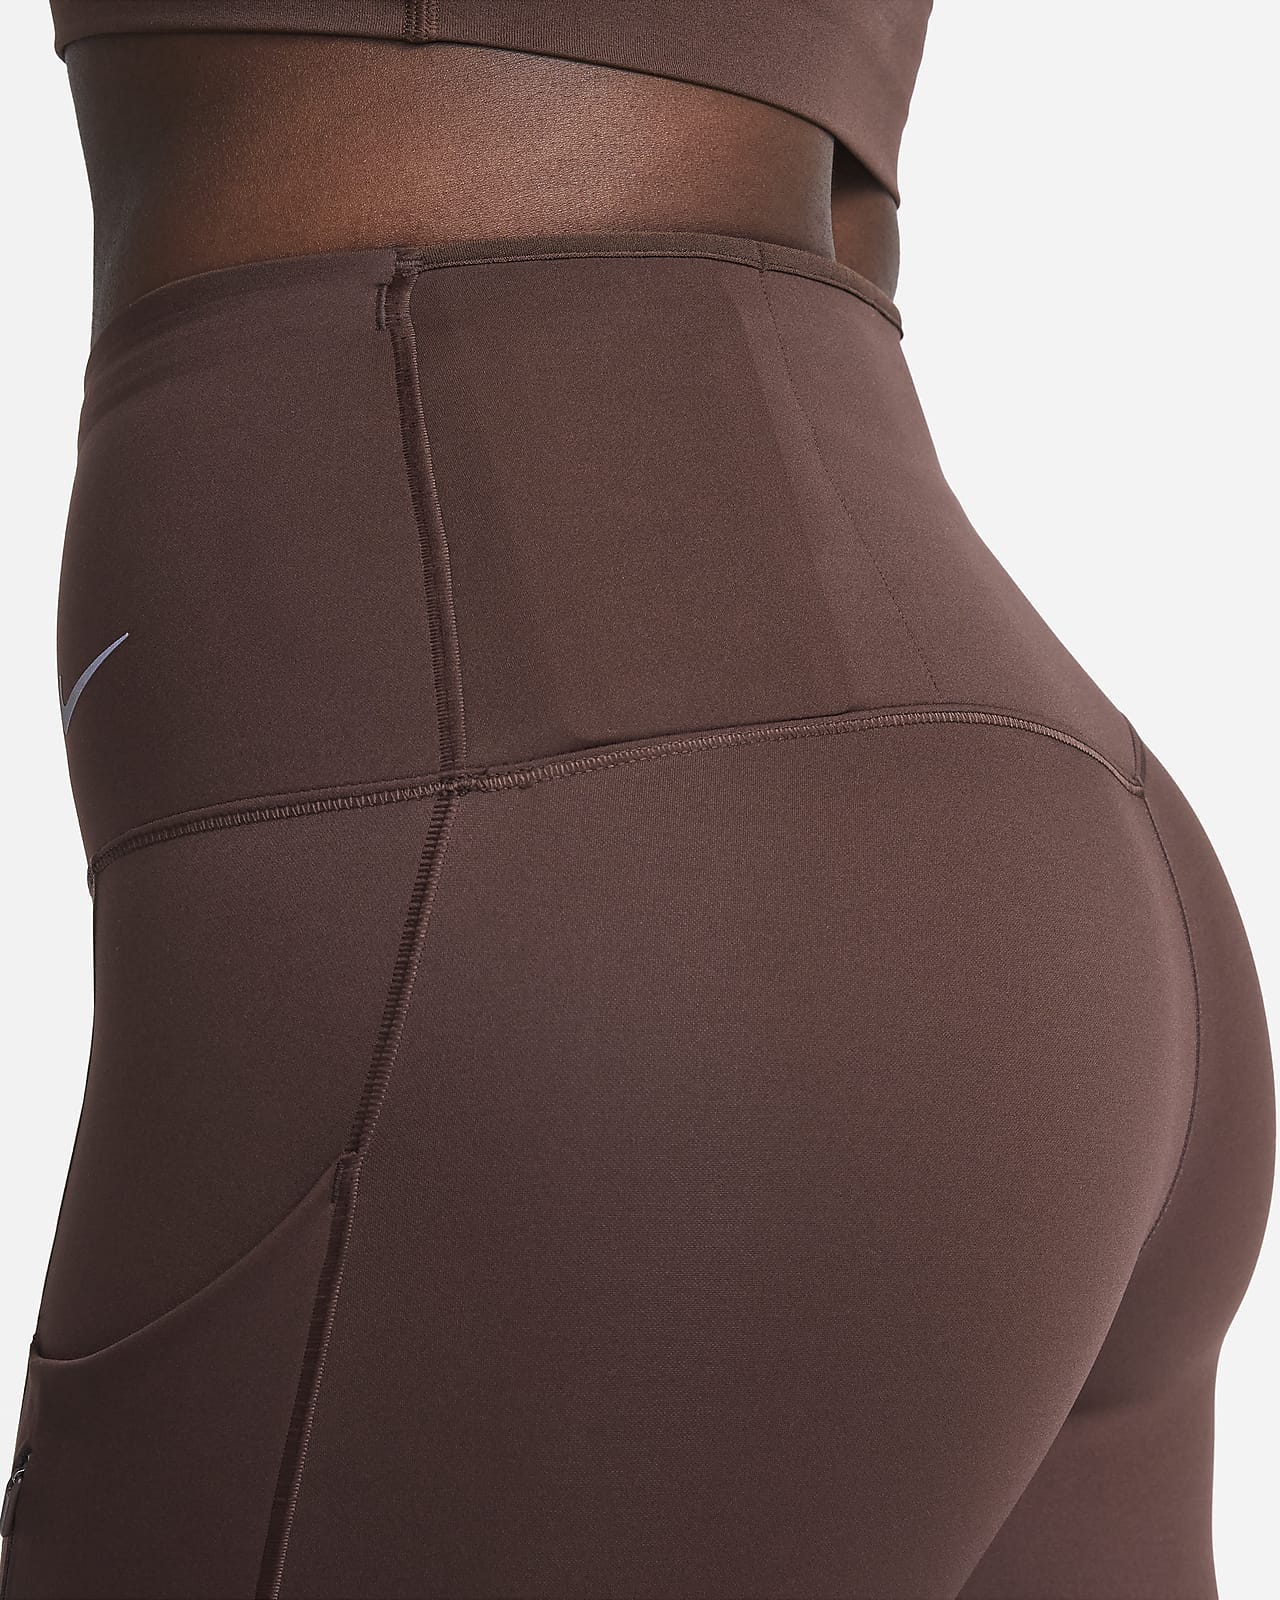 Nike Women's Pro Therma-FIT ADV High-Waisted Leggings